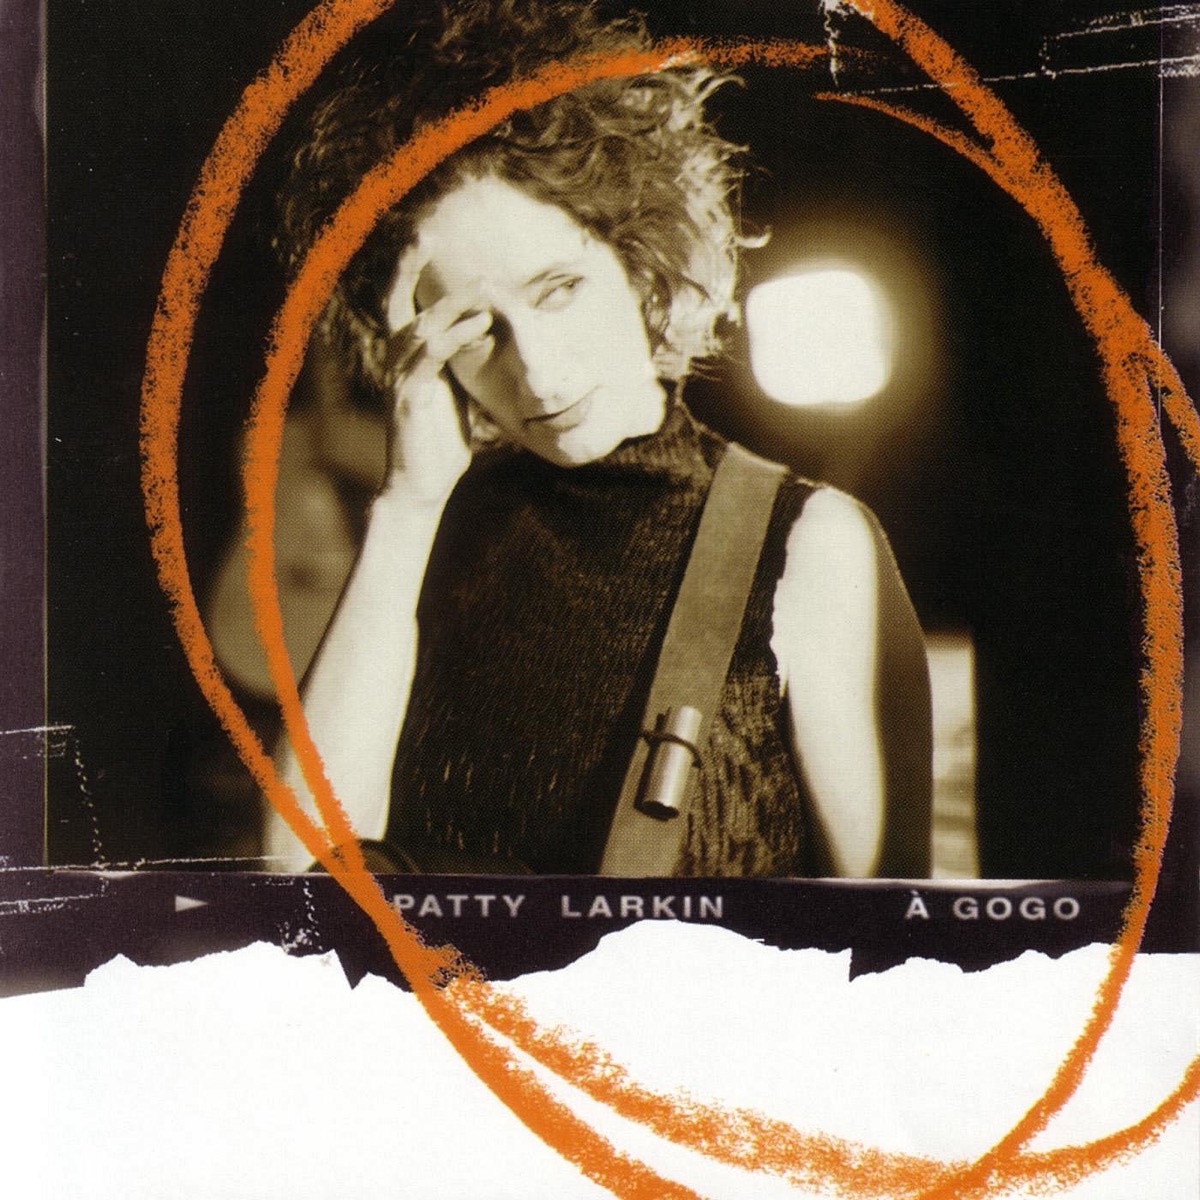 In The Square (Live) - Album by Patty Larkin - Apple Music